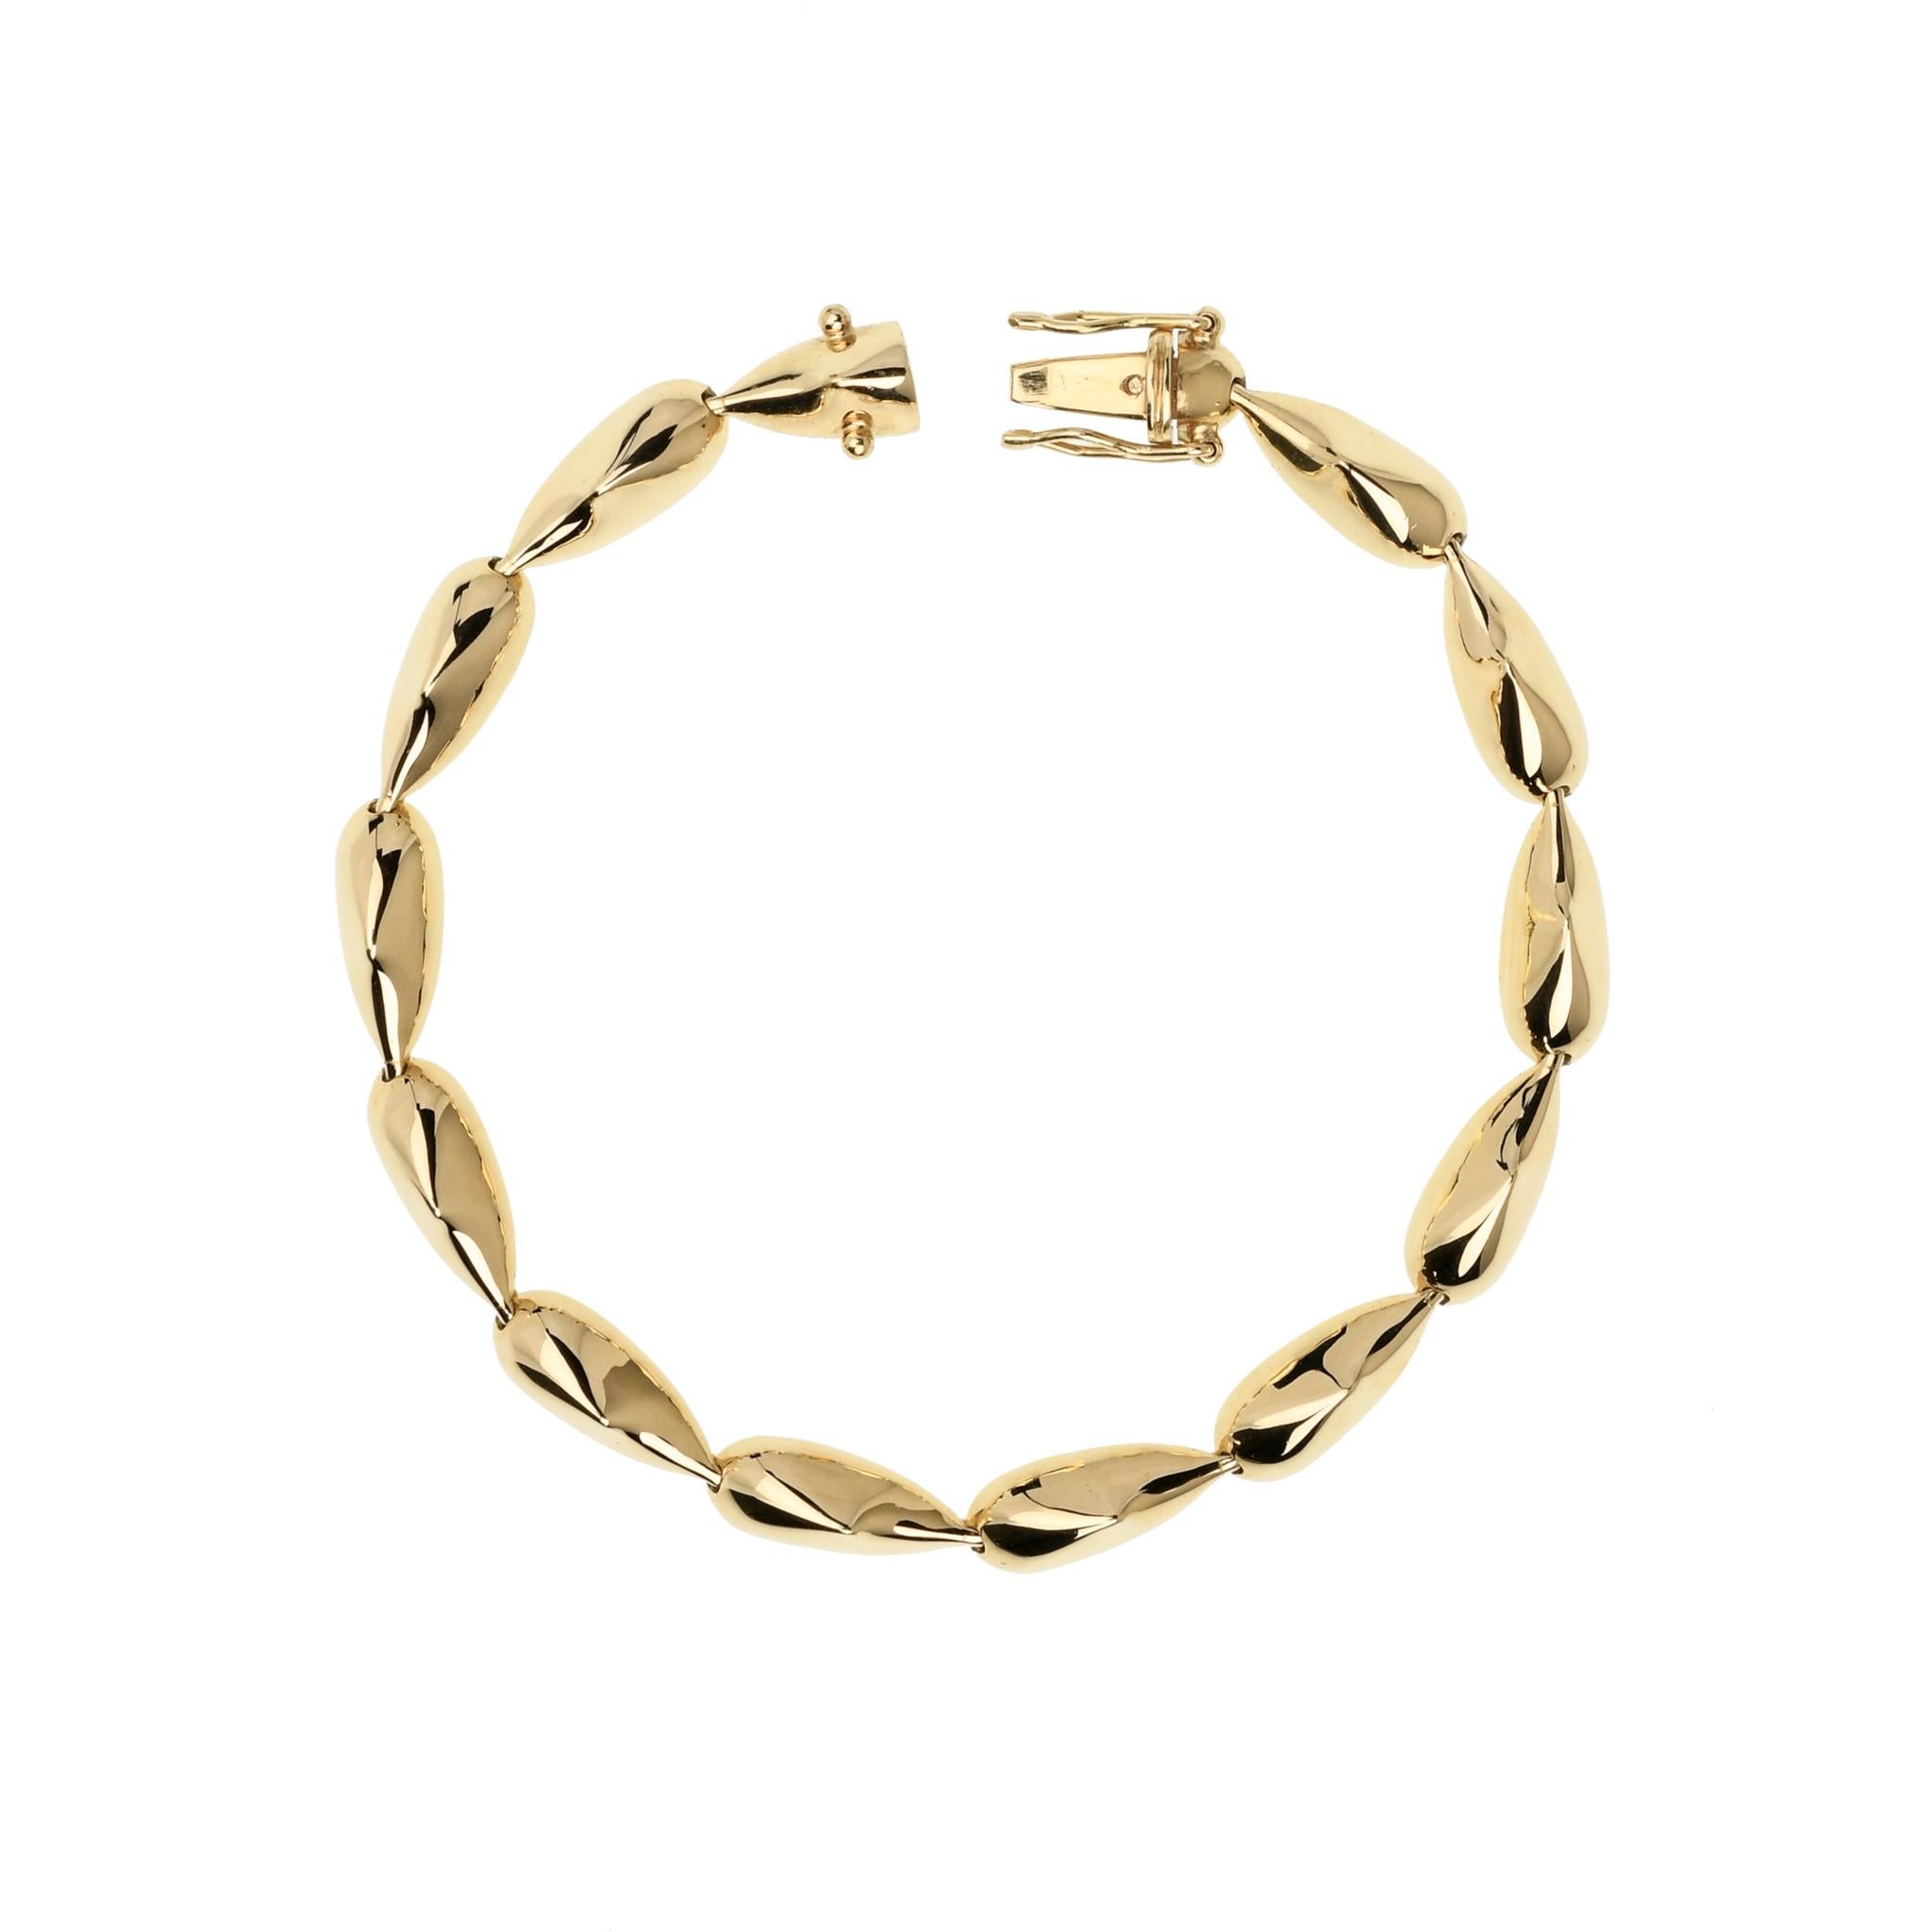 Maria Kotsoni Contemporary 18K Yellow Gold, Articulated Spike Link Bracelet